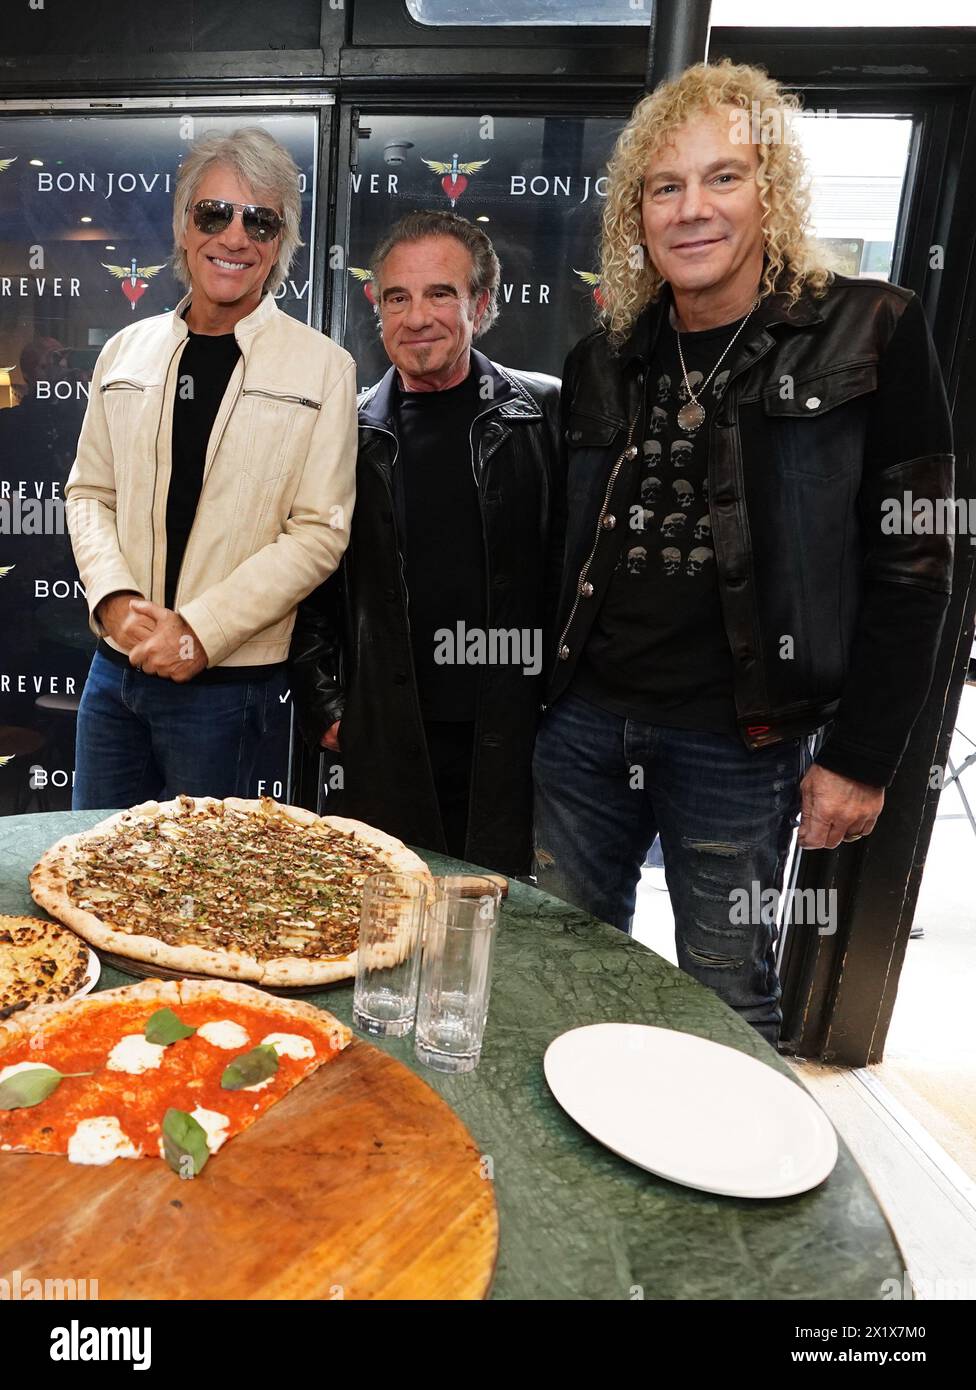 Jon Bon Jovi, Tico Torres, and David Bryan of American rock band Bon Jovi with fans during a pizza party and listening event for their new album 'Forever' in central London. Fans invited to the listening event for the album, which is released on June 7, were surprised when their music idols joined the London gathering. Picture date: Thursday April 18, 2024. Stock Photo